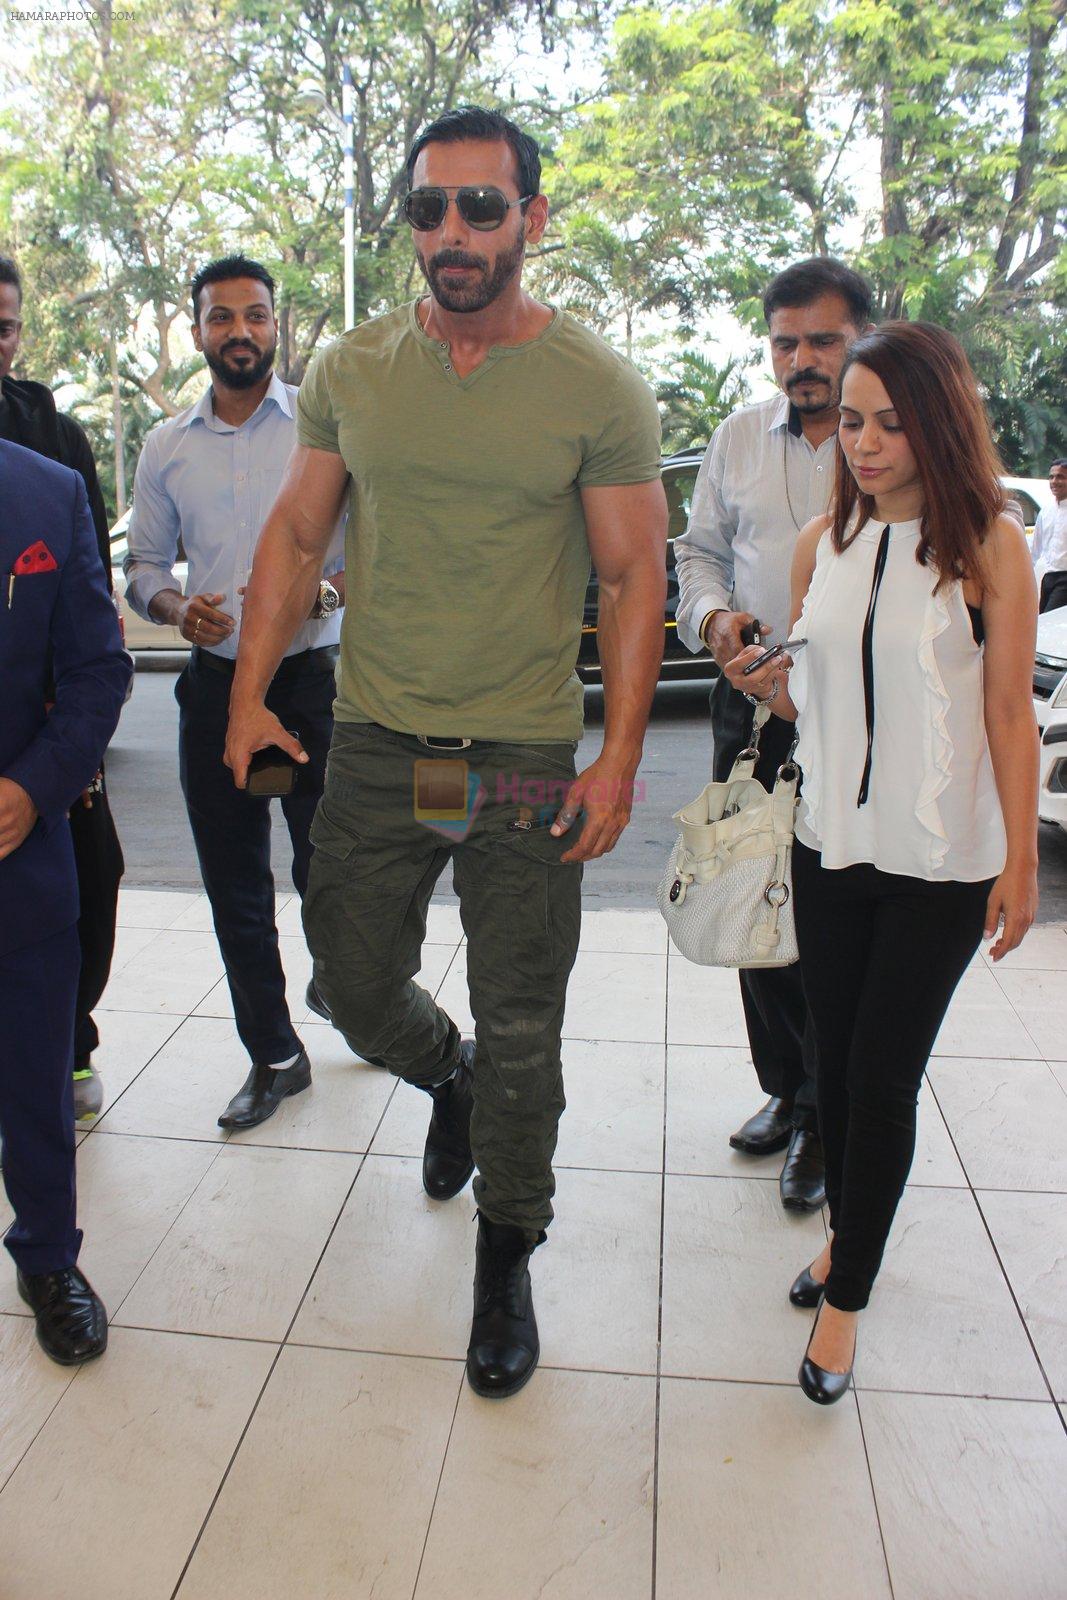 John Abraham snapped at airport on 3rd MArch 2016